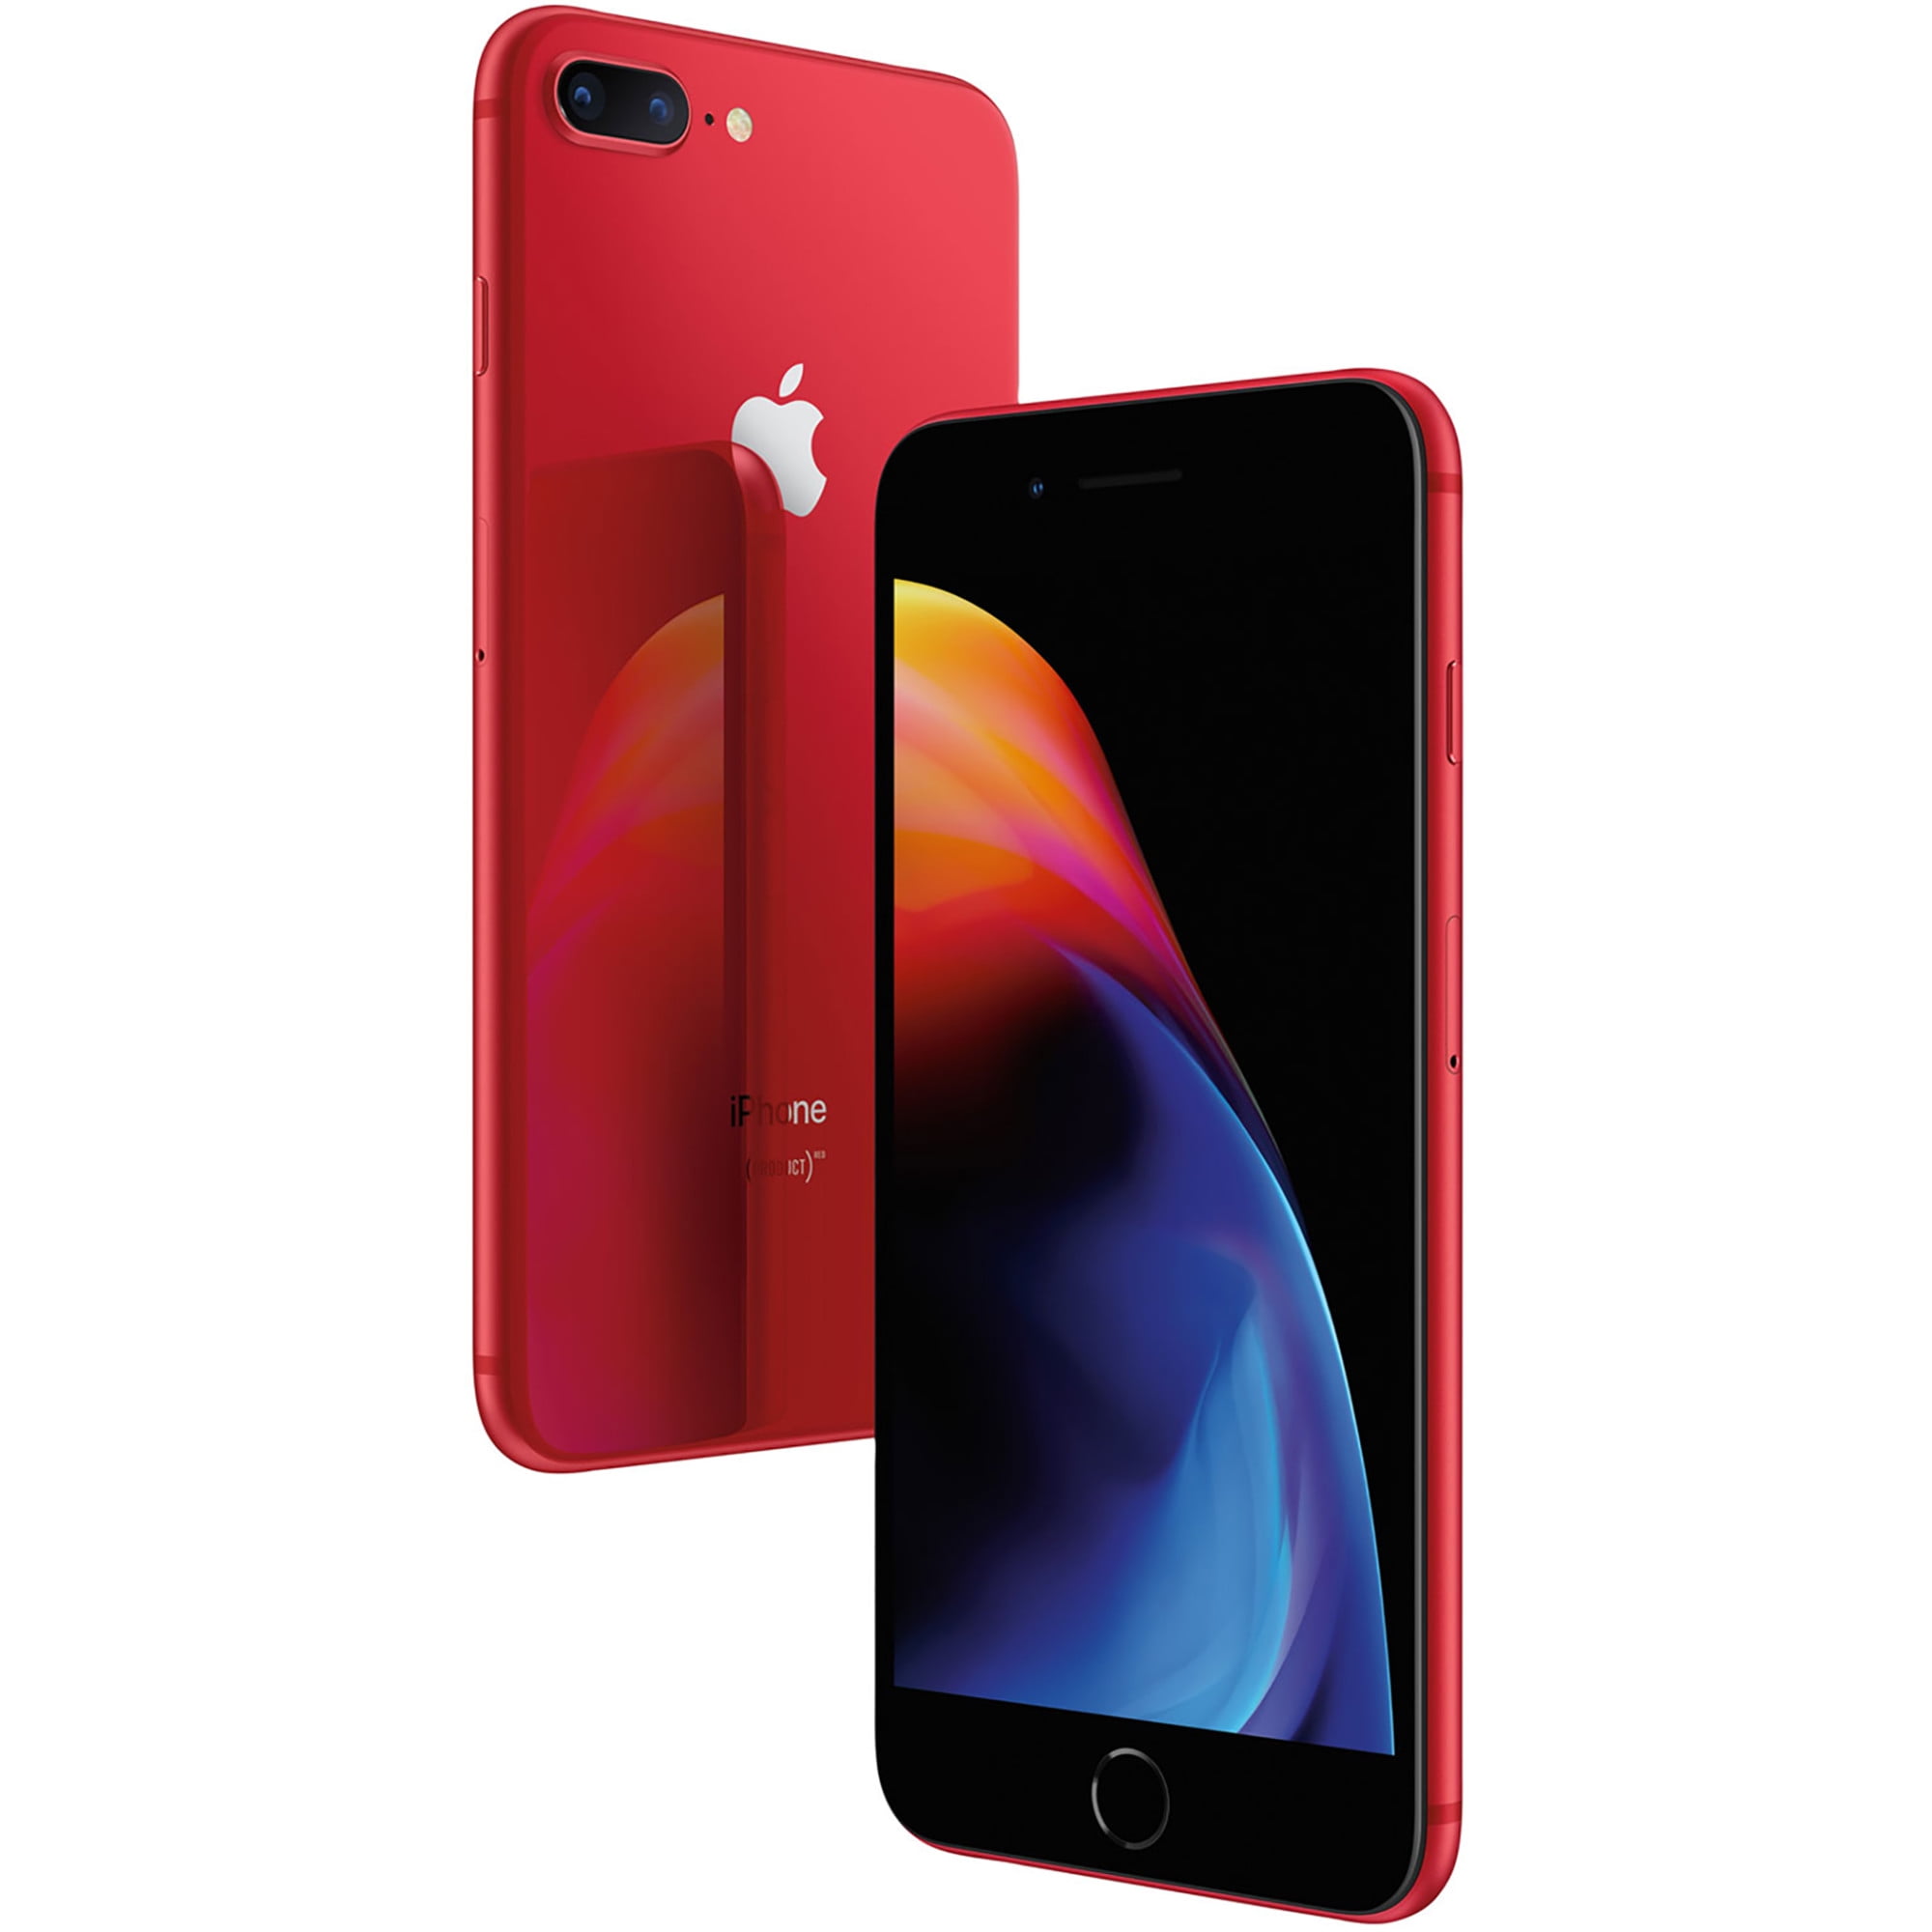 Restored Apple iPhone 8 Plus 256GB Unlocked GSM 4G LTE Phone with Dual 12MP  Camera, Red (Refurbished)